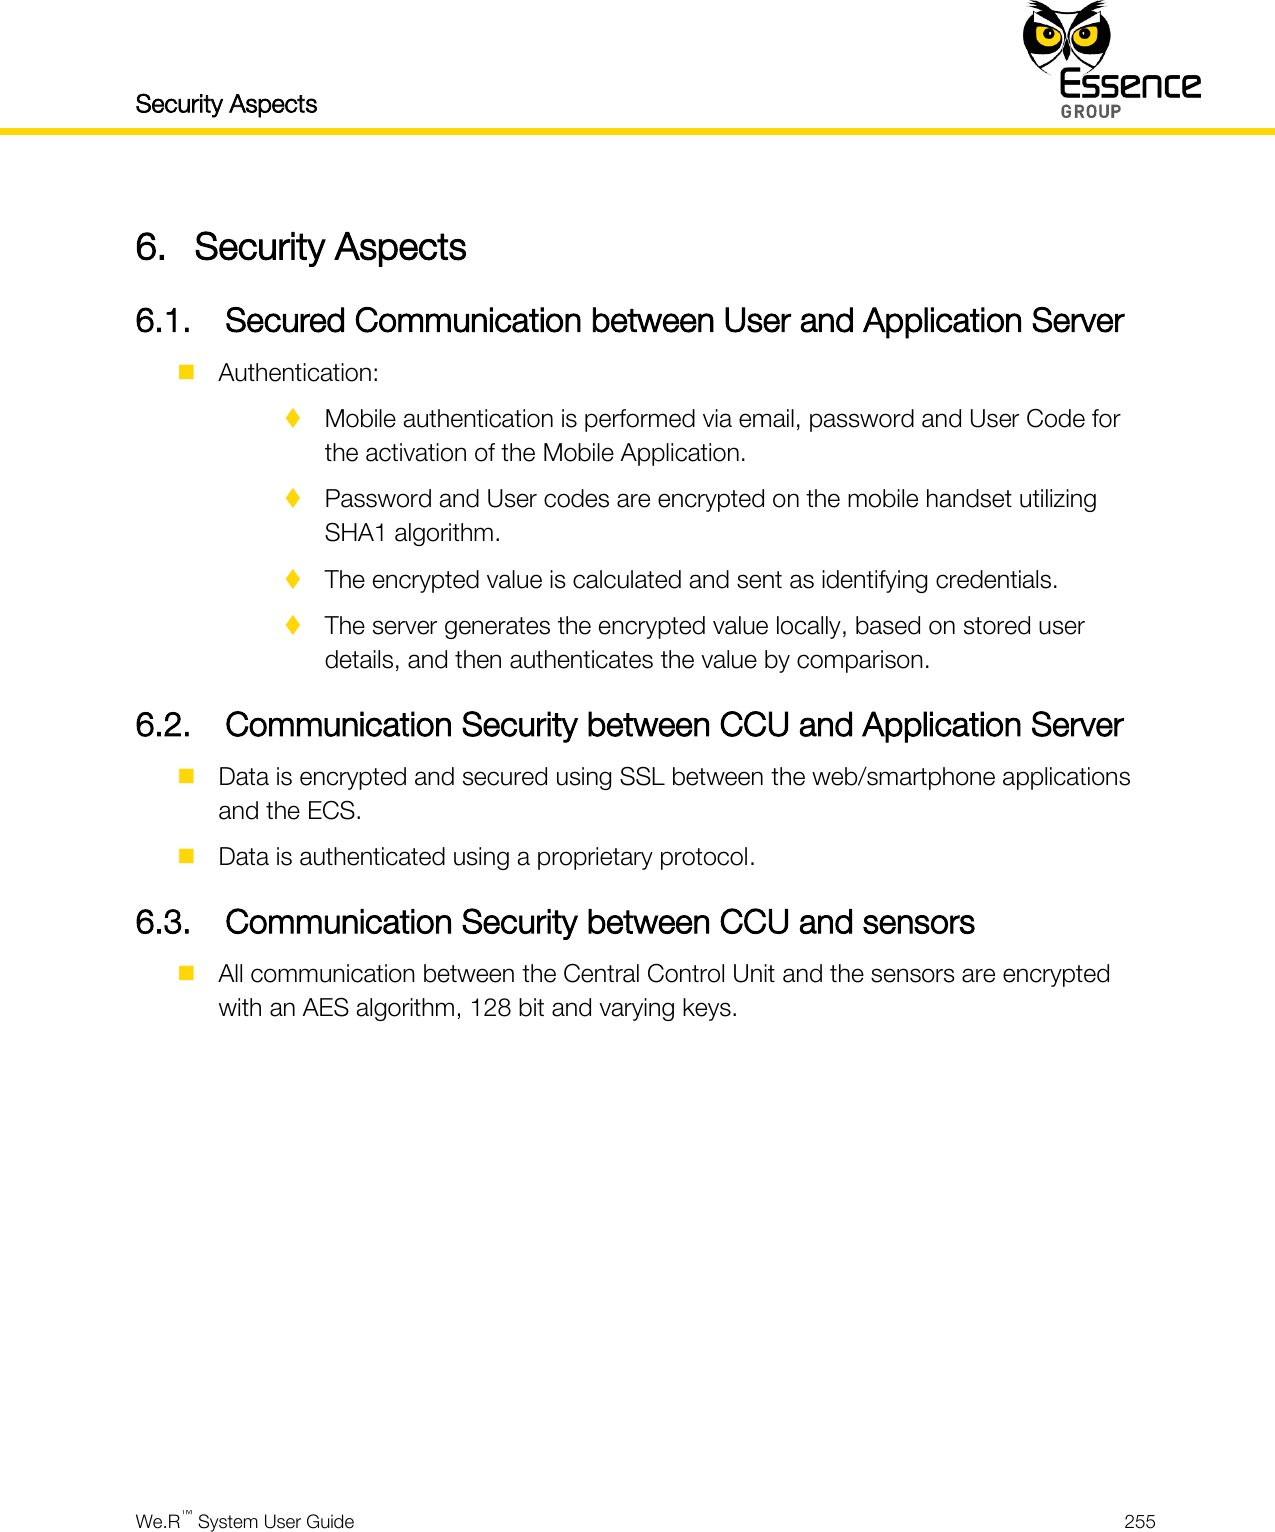 Security Aspects    We.R™ System User Guide  255  6. Security Aspects 6.1. Secured Communication between User and Application Server  Authentication:  Mobile authentication is performed via email, password and User Code for the activation of the Mobile Application.  Password and User codes are encrypted on the mobile handset utilizing SHA1 algorithm.  The encrypted value is calculated and sent as identifying credentials.  The server generates the encrypted value locally, based on stored user details, and then authenticates the value by comparison. 6.2. Communication Security between CCU and Application Server  Data is encrypted and secured using SSL between the web/smartphone applications and the ECS.  Data is authenticated using a proprietary protocol. 6.3. Communication Security between CCU and sensors  All communication between the Central Control Unit and the sensors are encrypted with an AES algorithm, 128 bit and varying keys.     